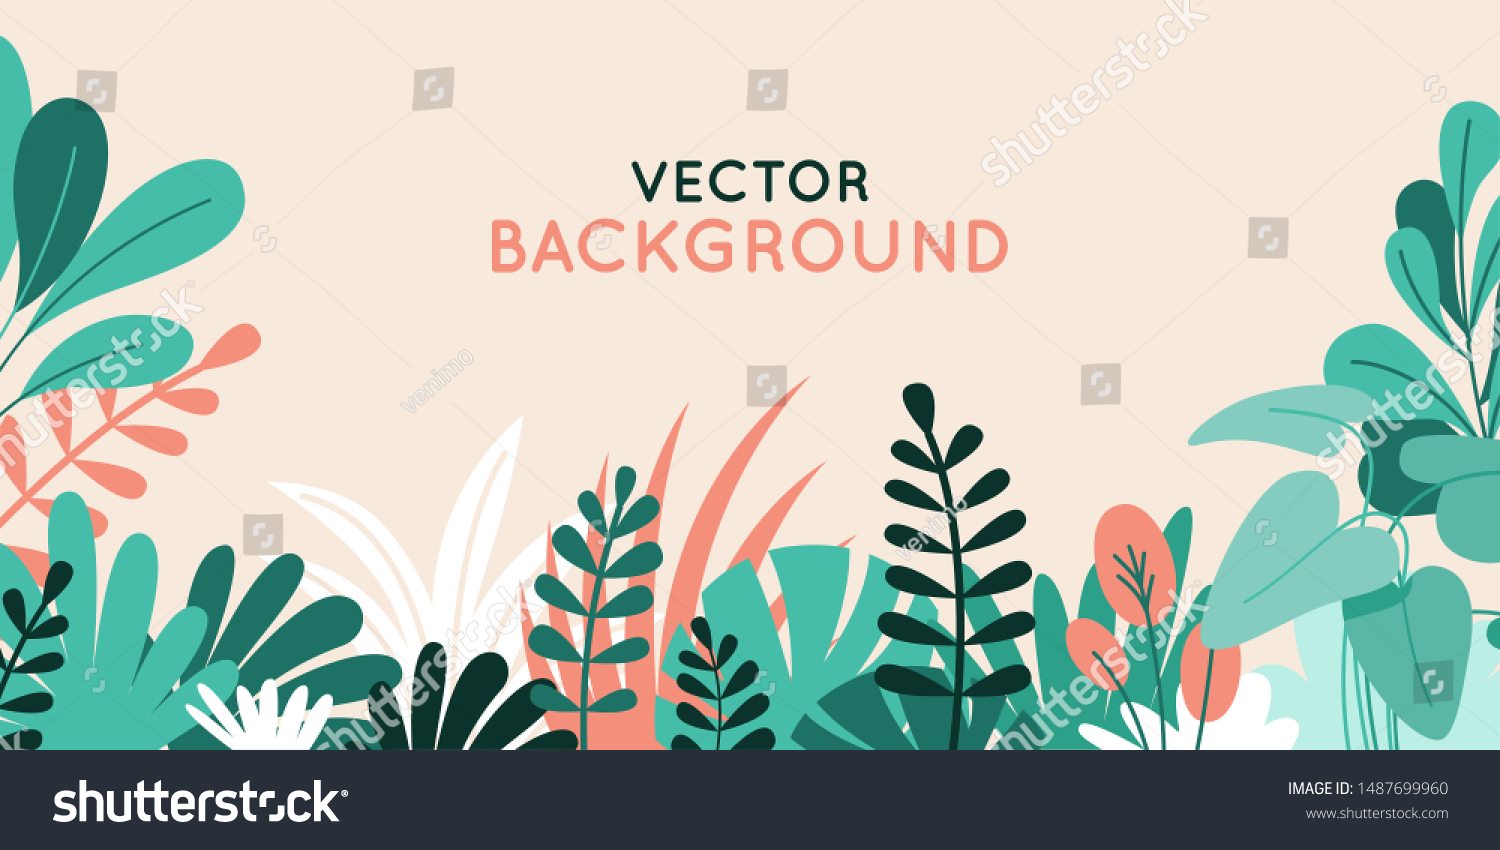 Vector illustration in simple flat style with copy space for text - background with plants and leaves - backdrop for greeting cards, posters, banners and placards #1487699960